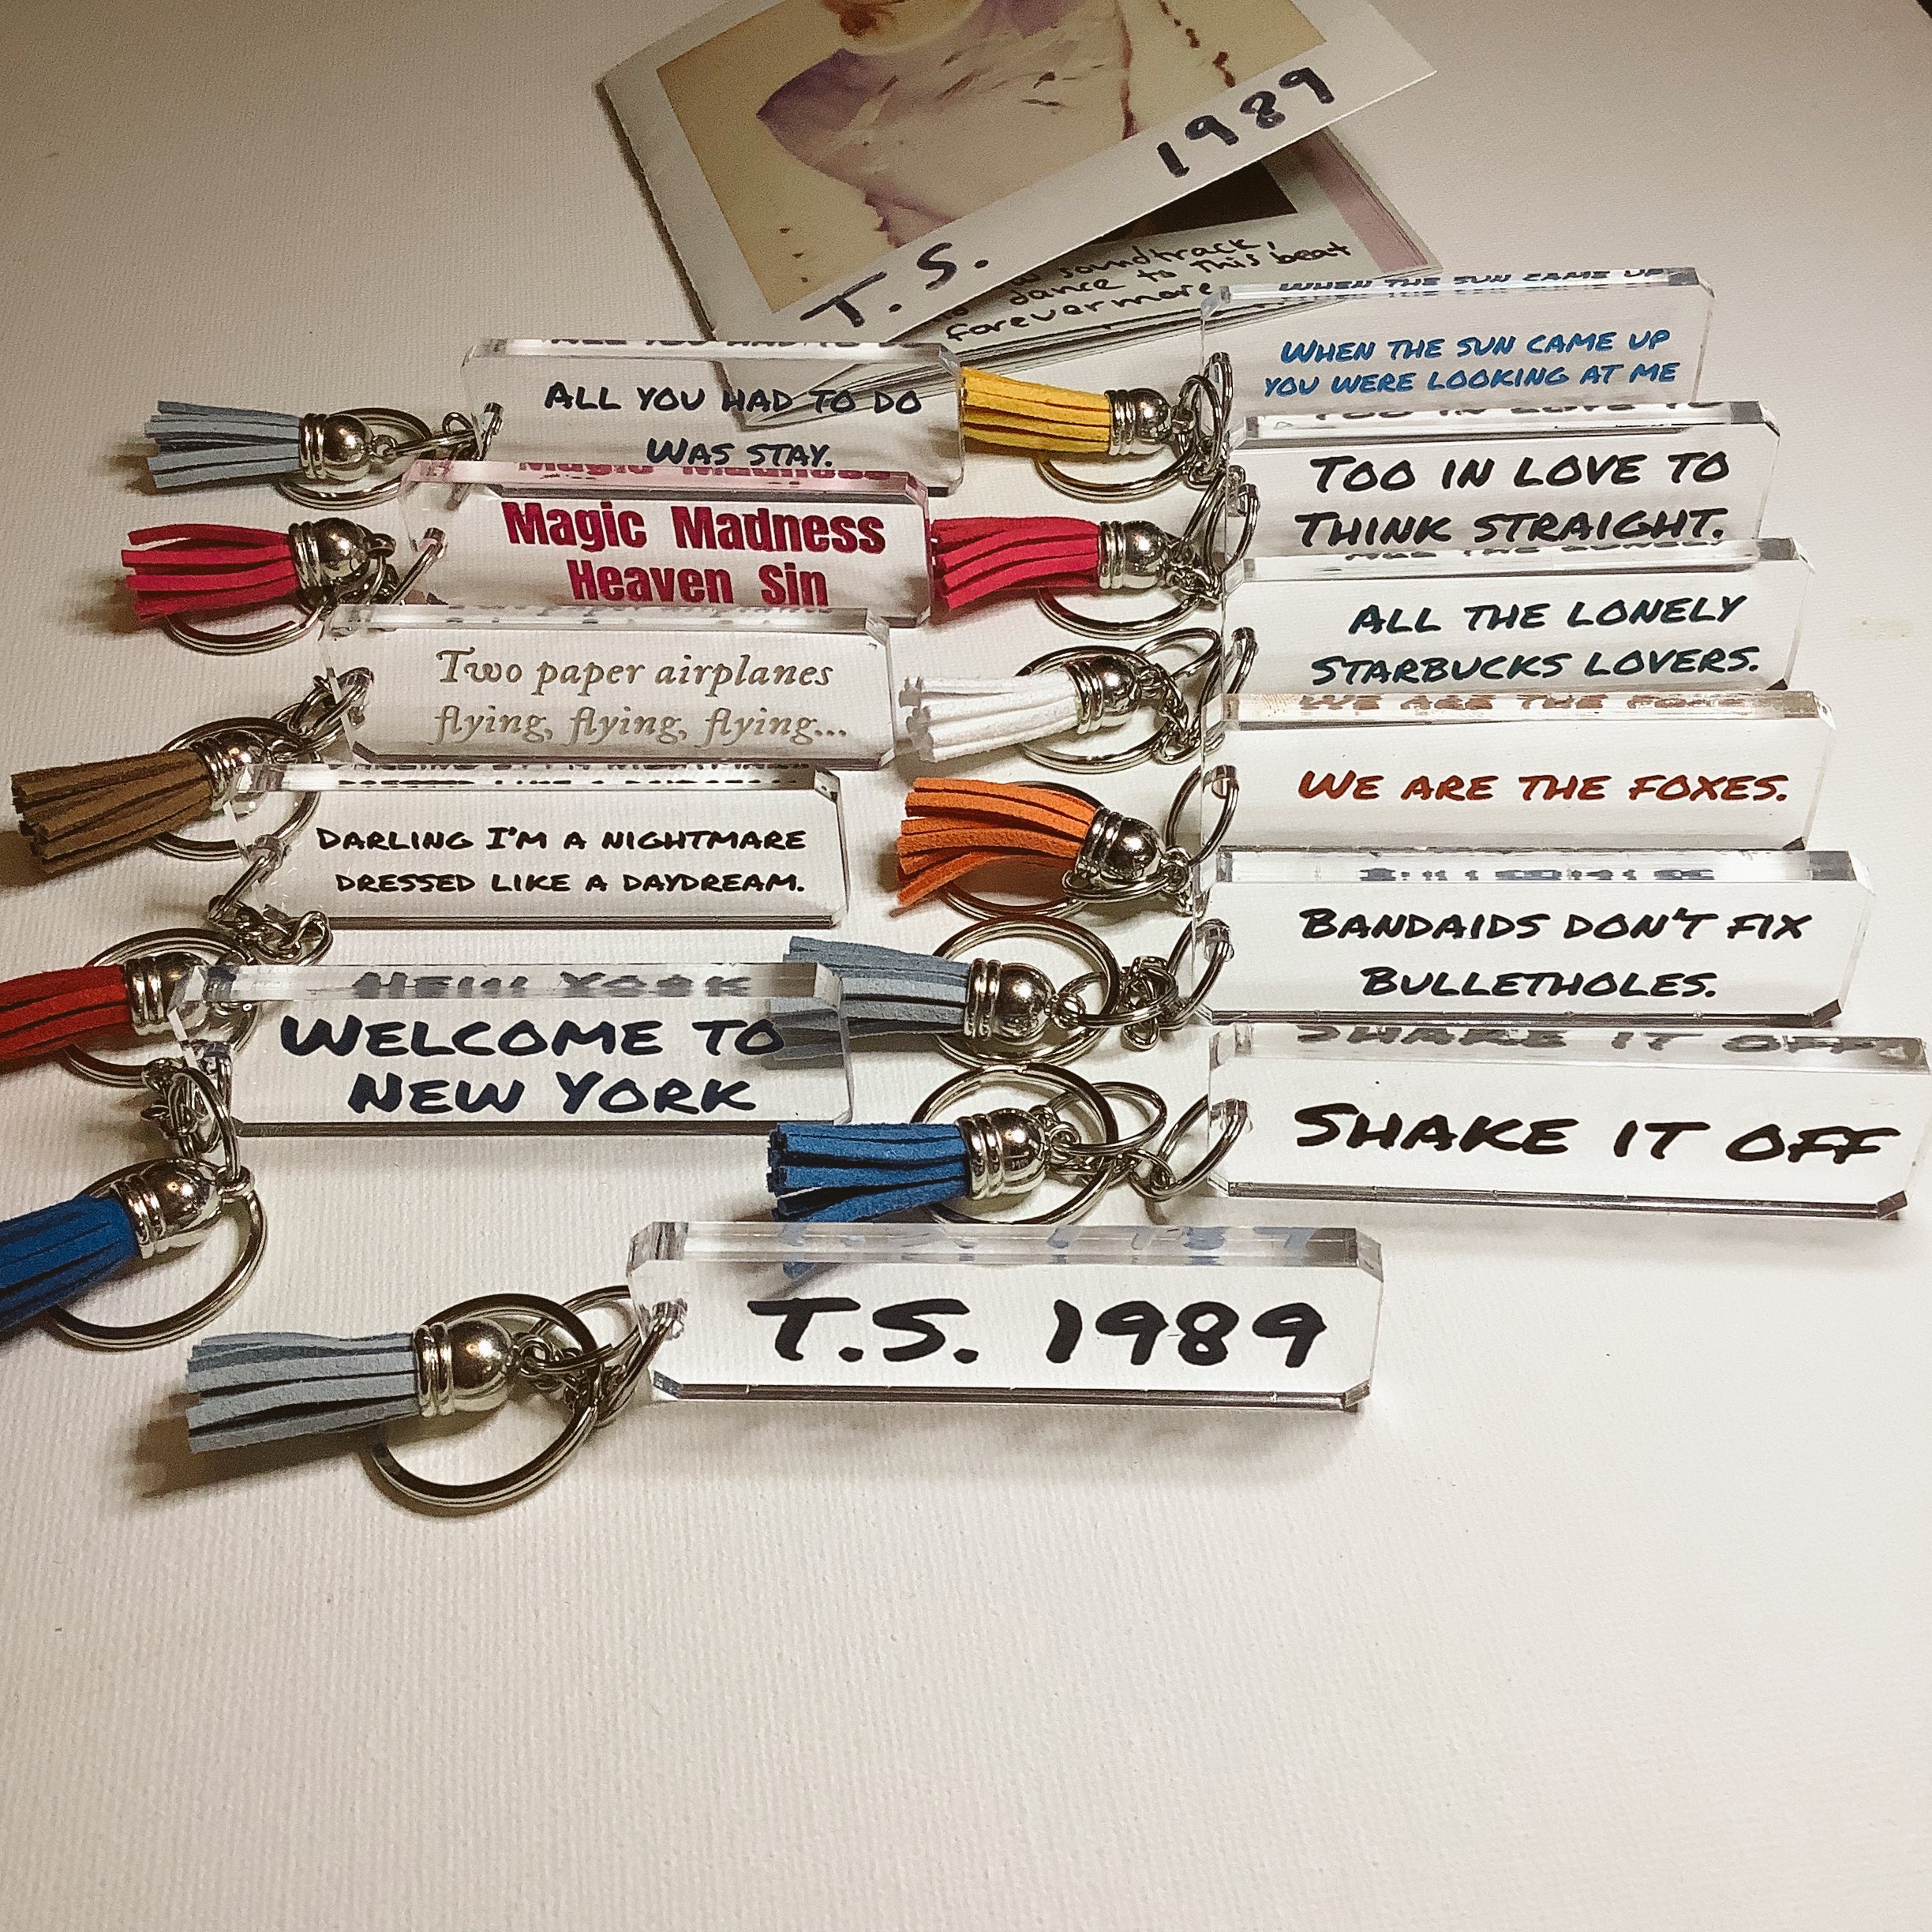 Taylor Inspired 1989 TV or Red Album Keychains NEW